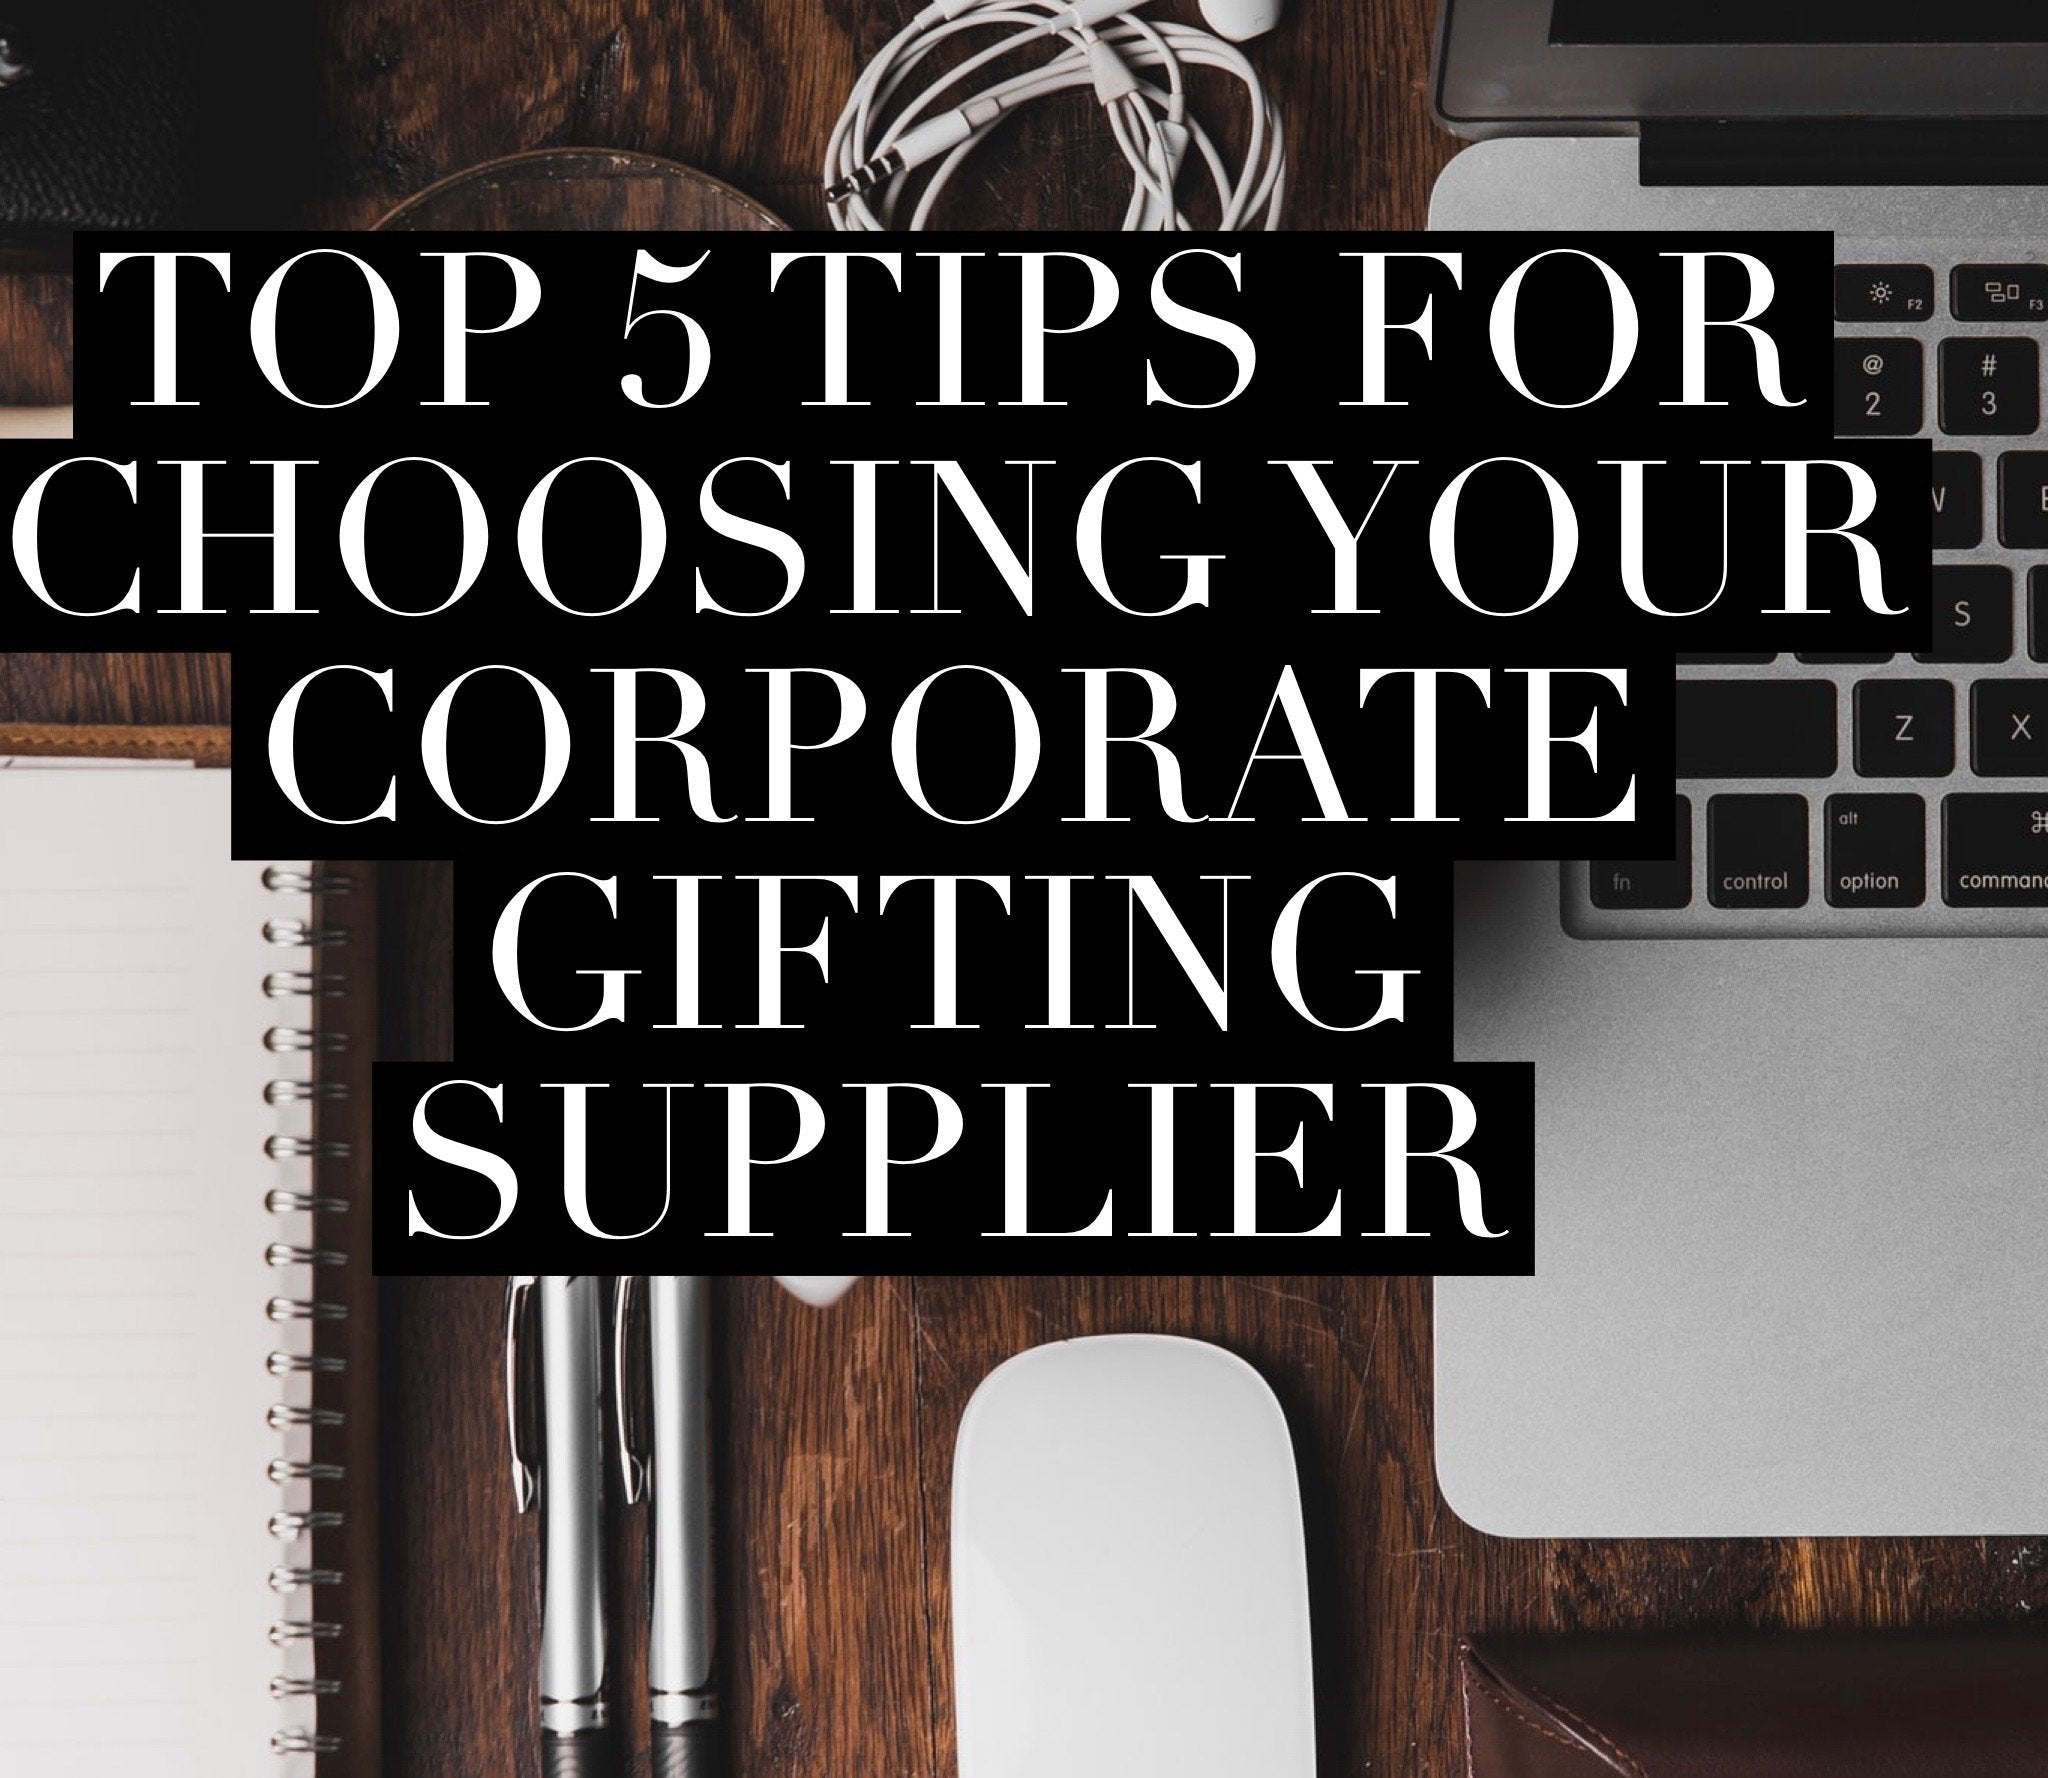 Top 5 tips for choosing your corporate gifting supplier | Social Stories Club